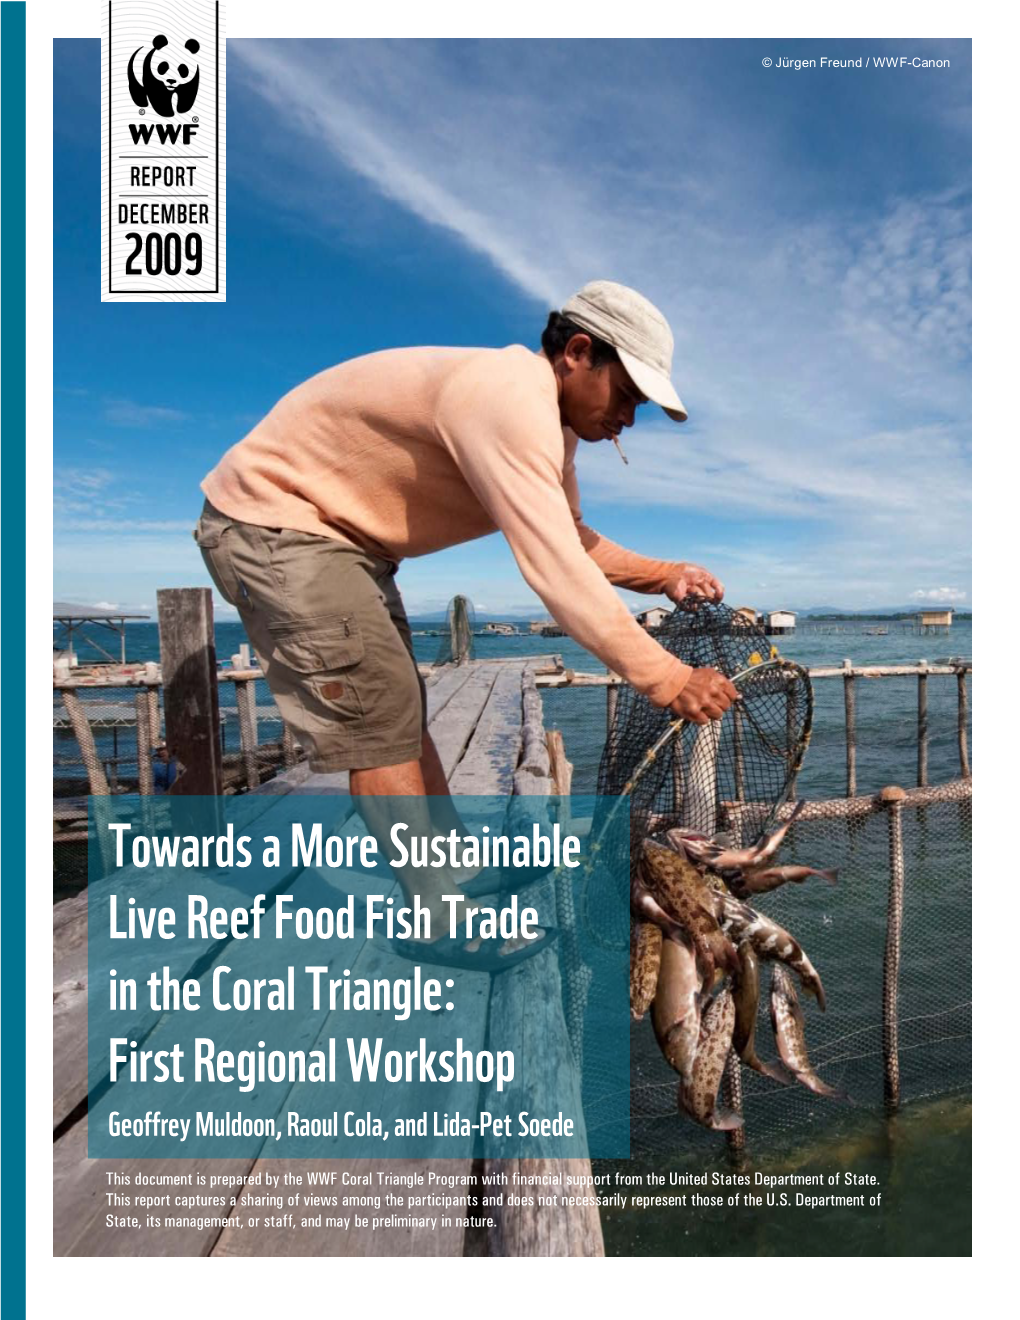 Towards a More Sustainable Live Reef Food Fish Trade in the Coral Triangle: First Regional Workshop